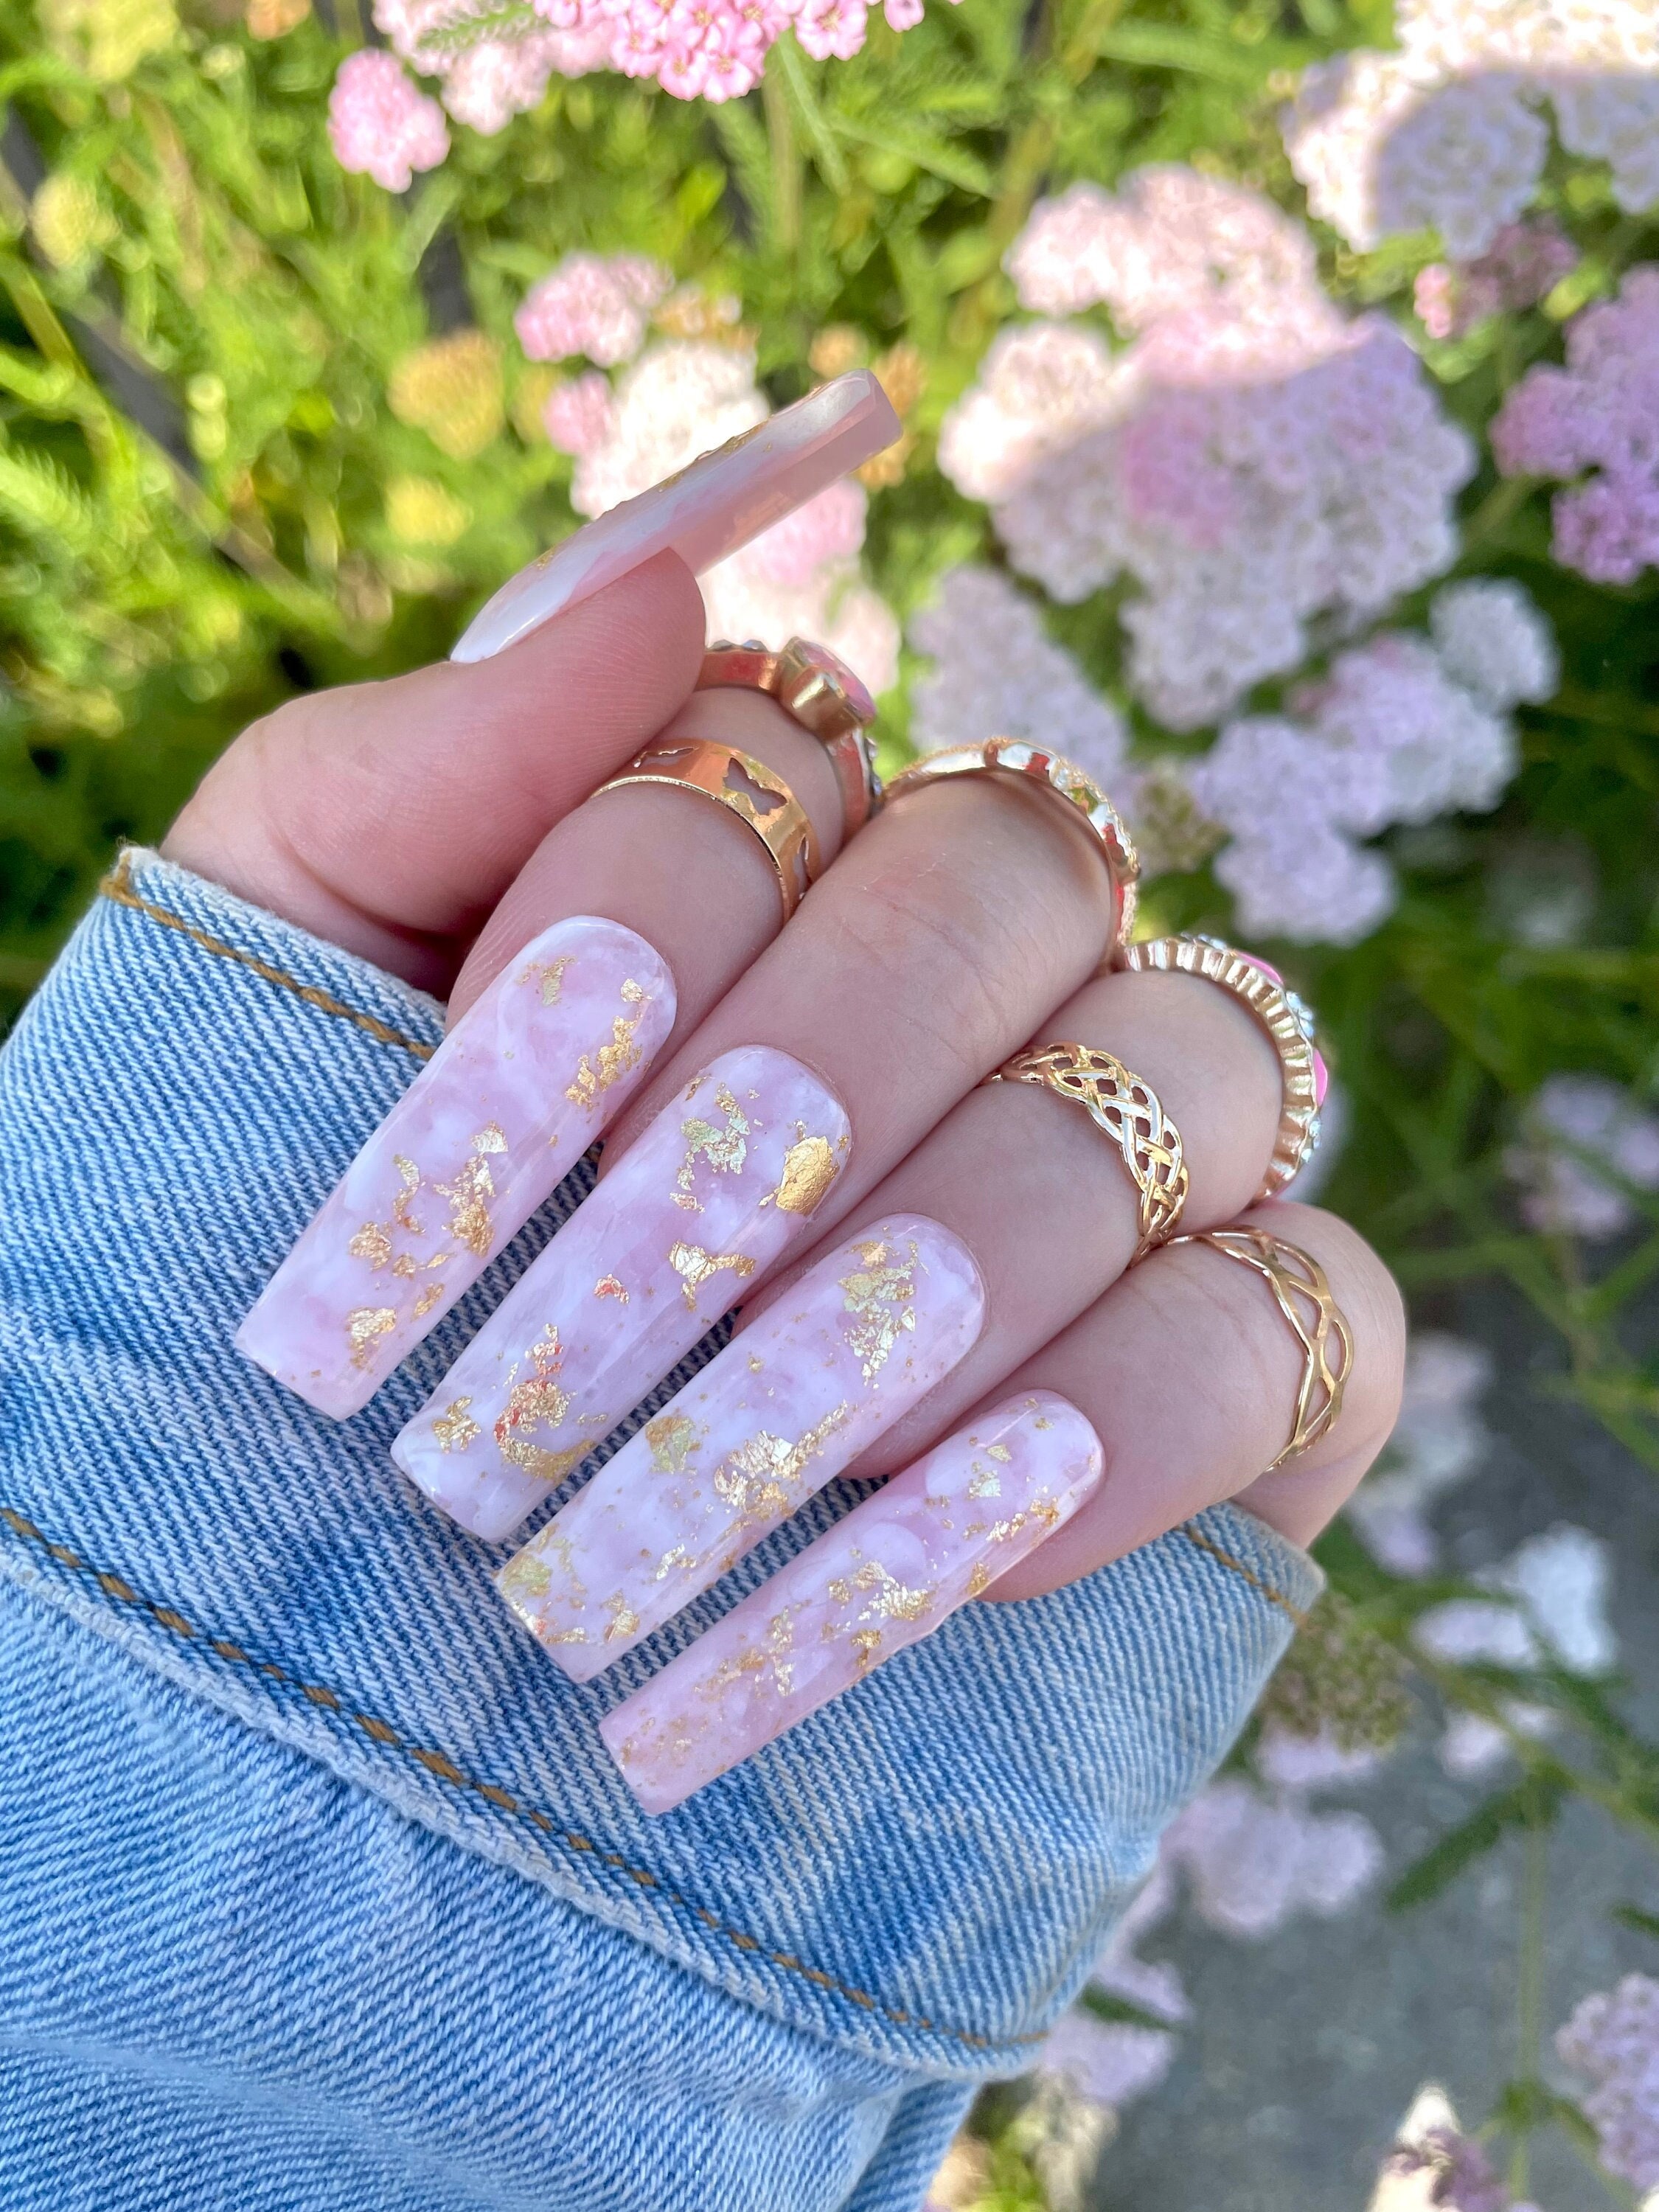 30 Marble Nails That Are Classy & Timeless | Chique nagels, Ballerina  nagels, Acrylnagelontwerpen